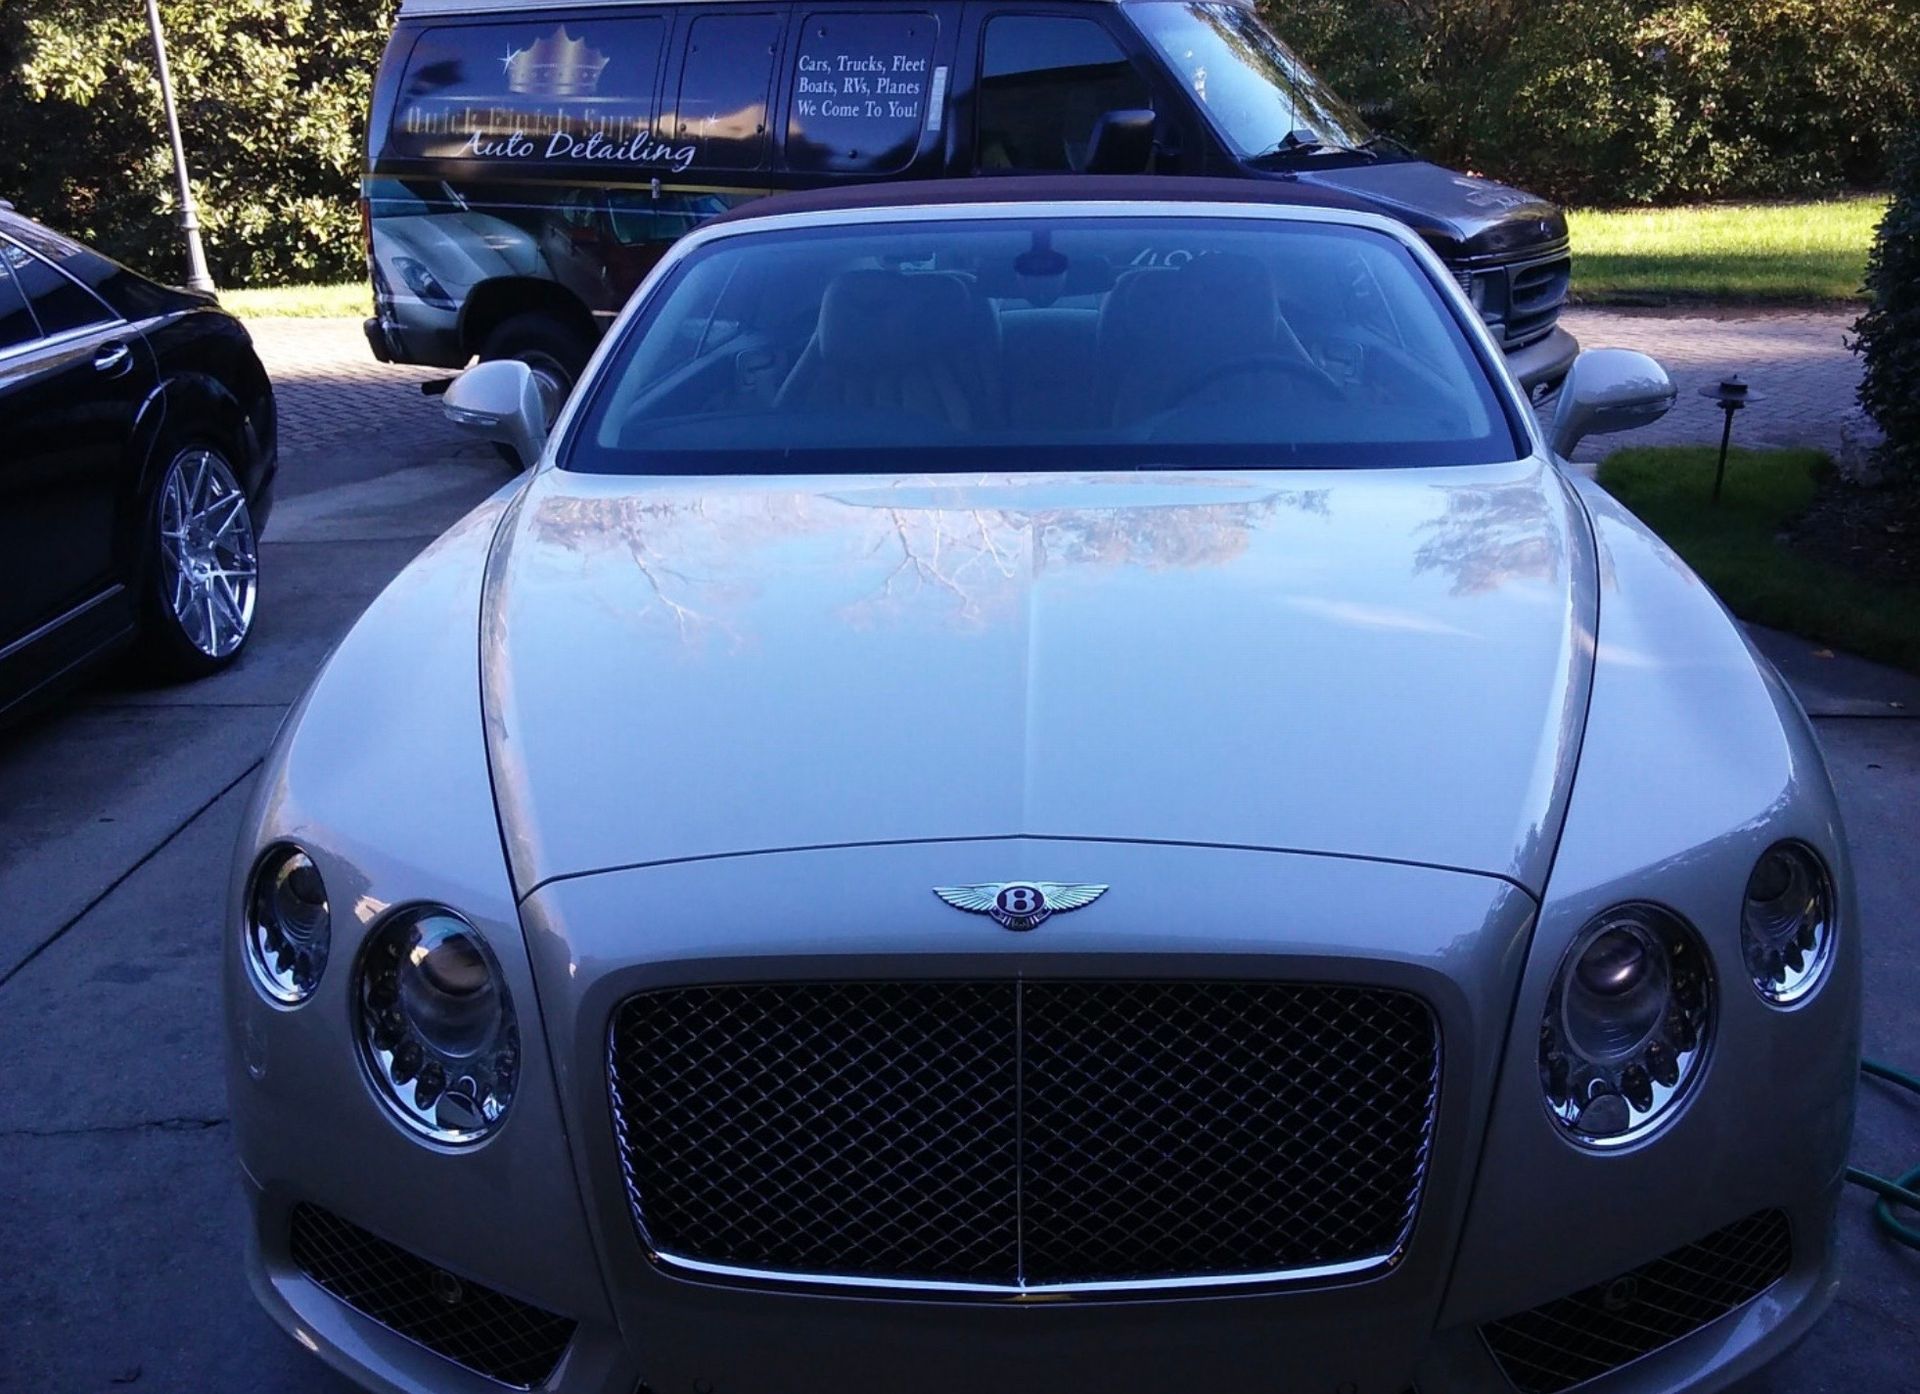 Luxury Car Detailing Done By Quick Finish Supreme Auto Detailing